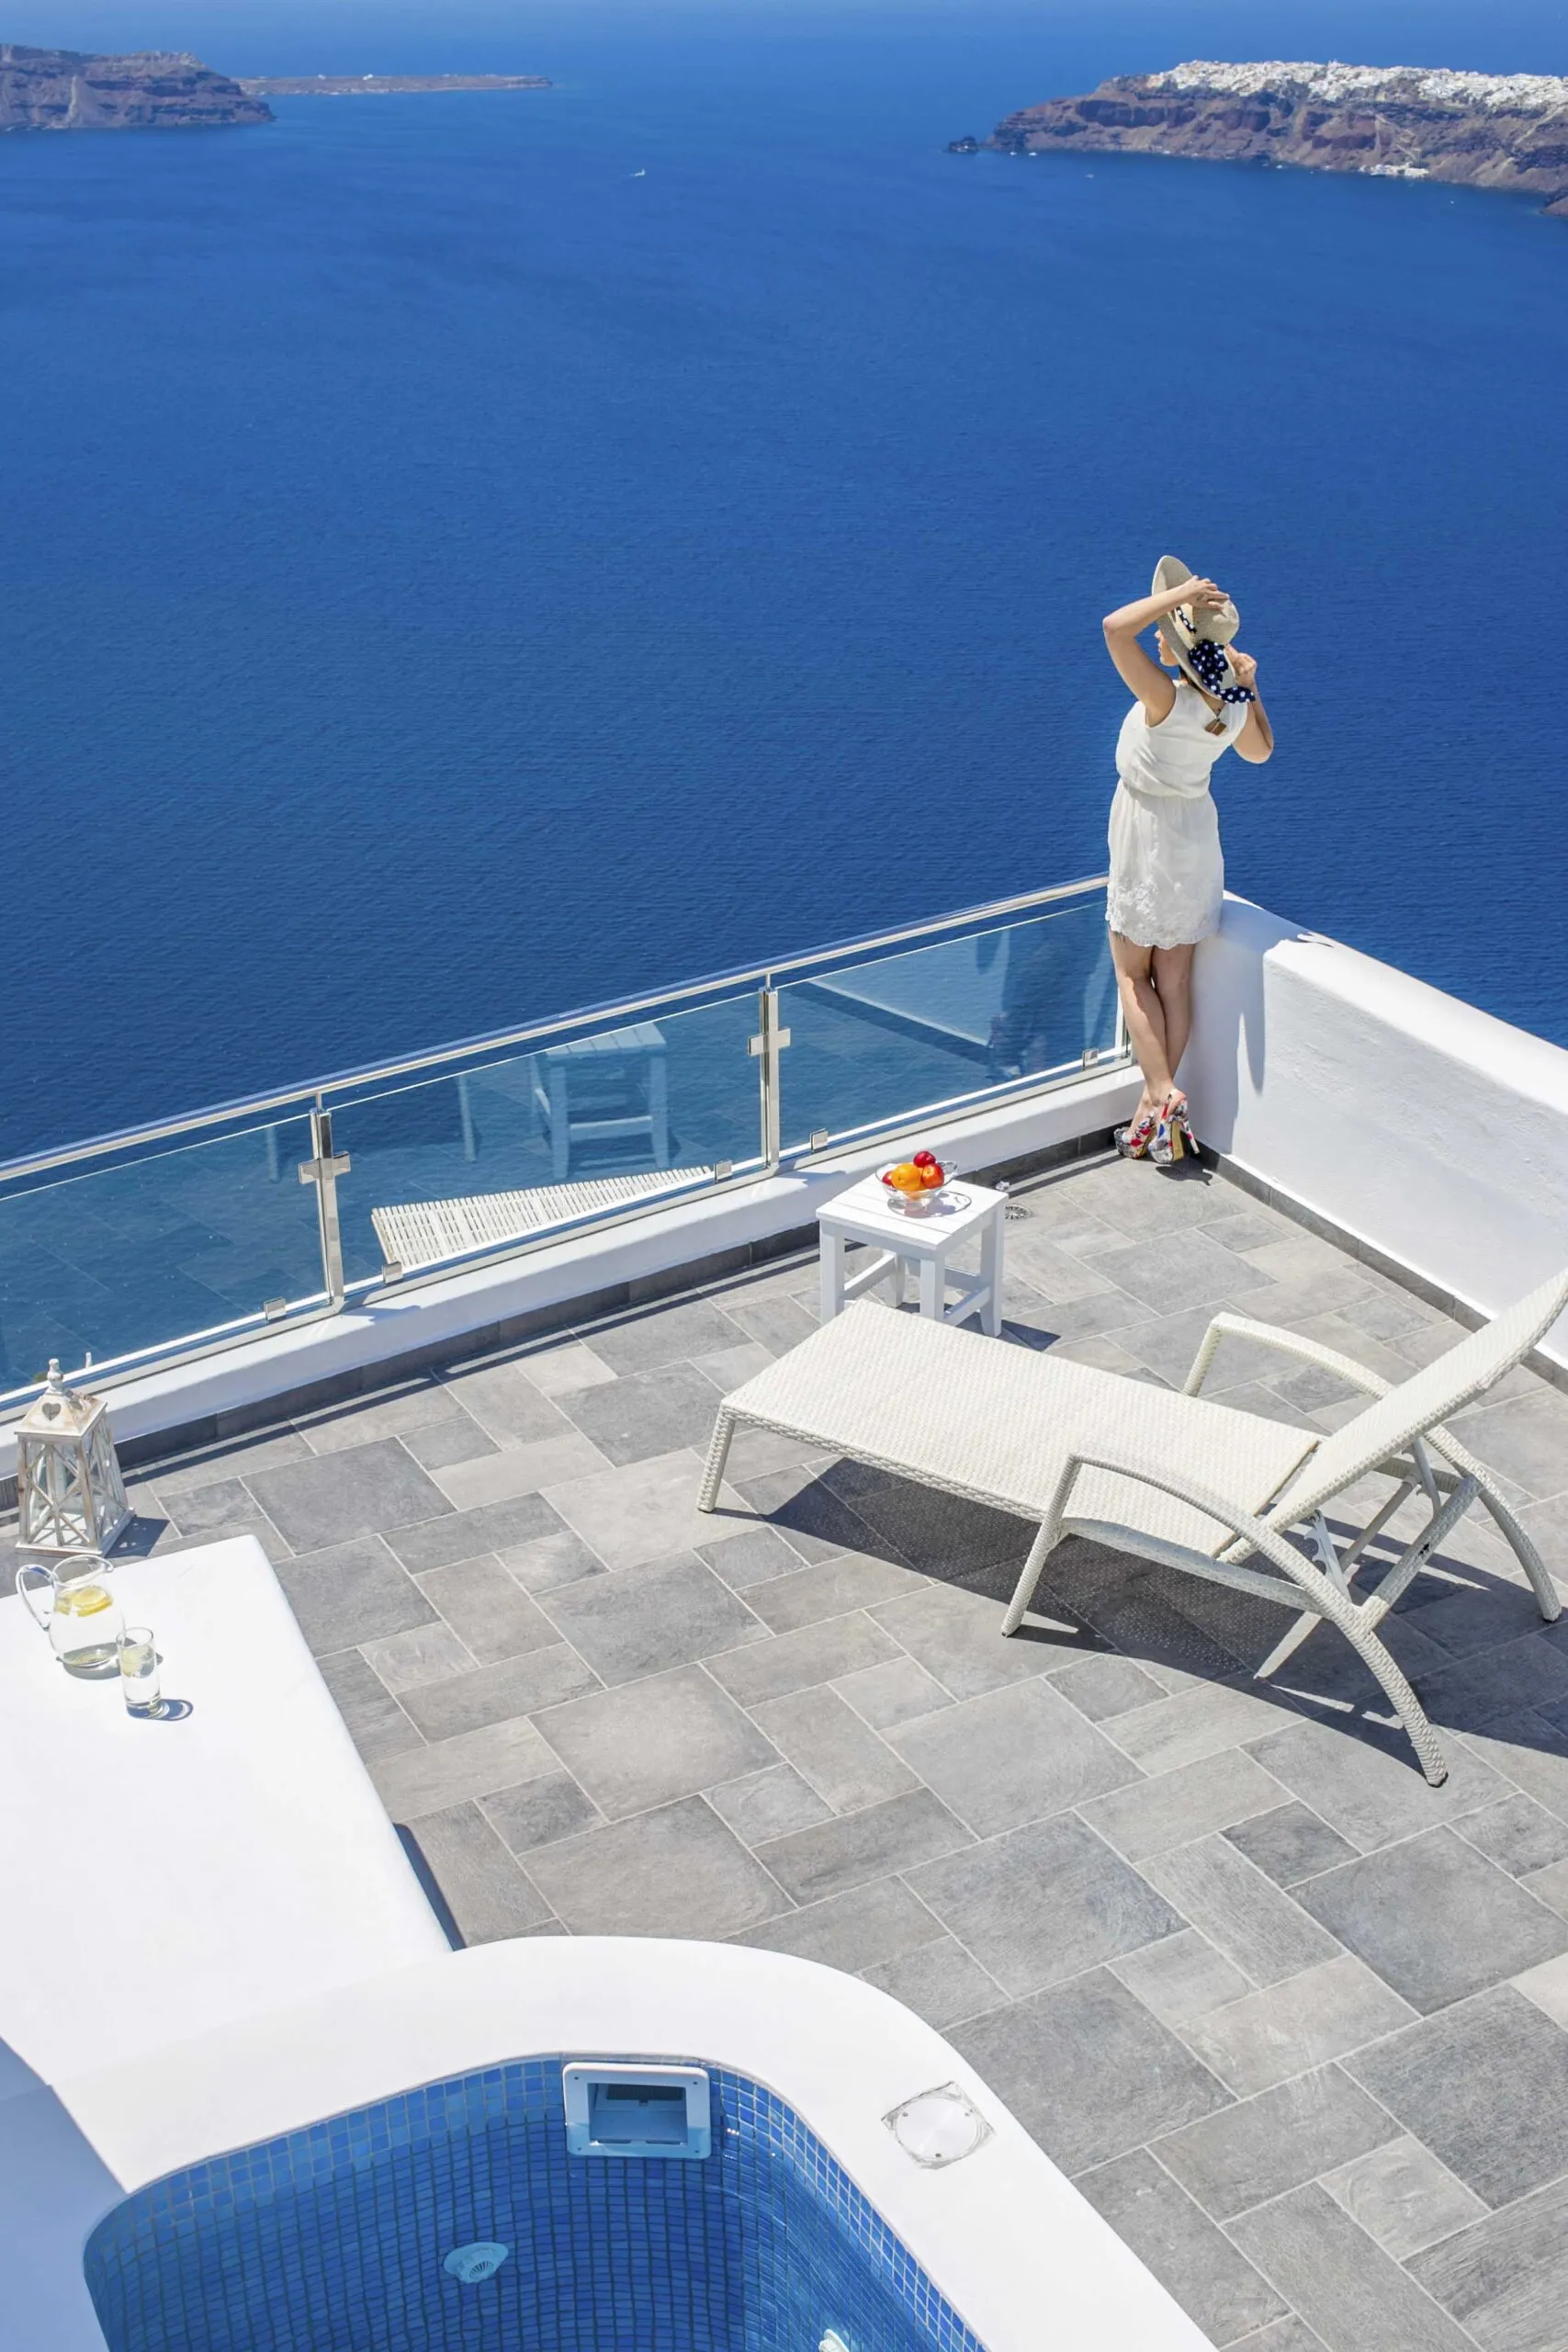 Executive Suite with Outdoor heated Jacuzzi gazing at the aegean sea